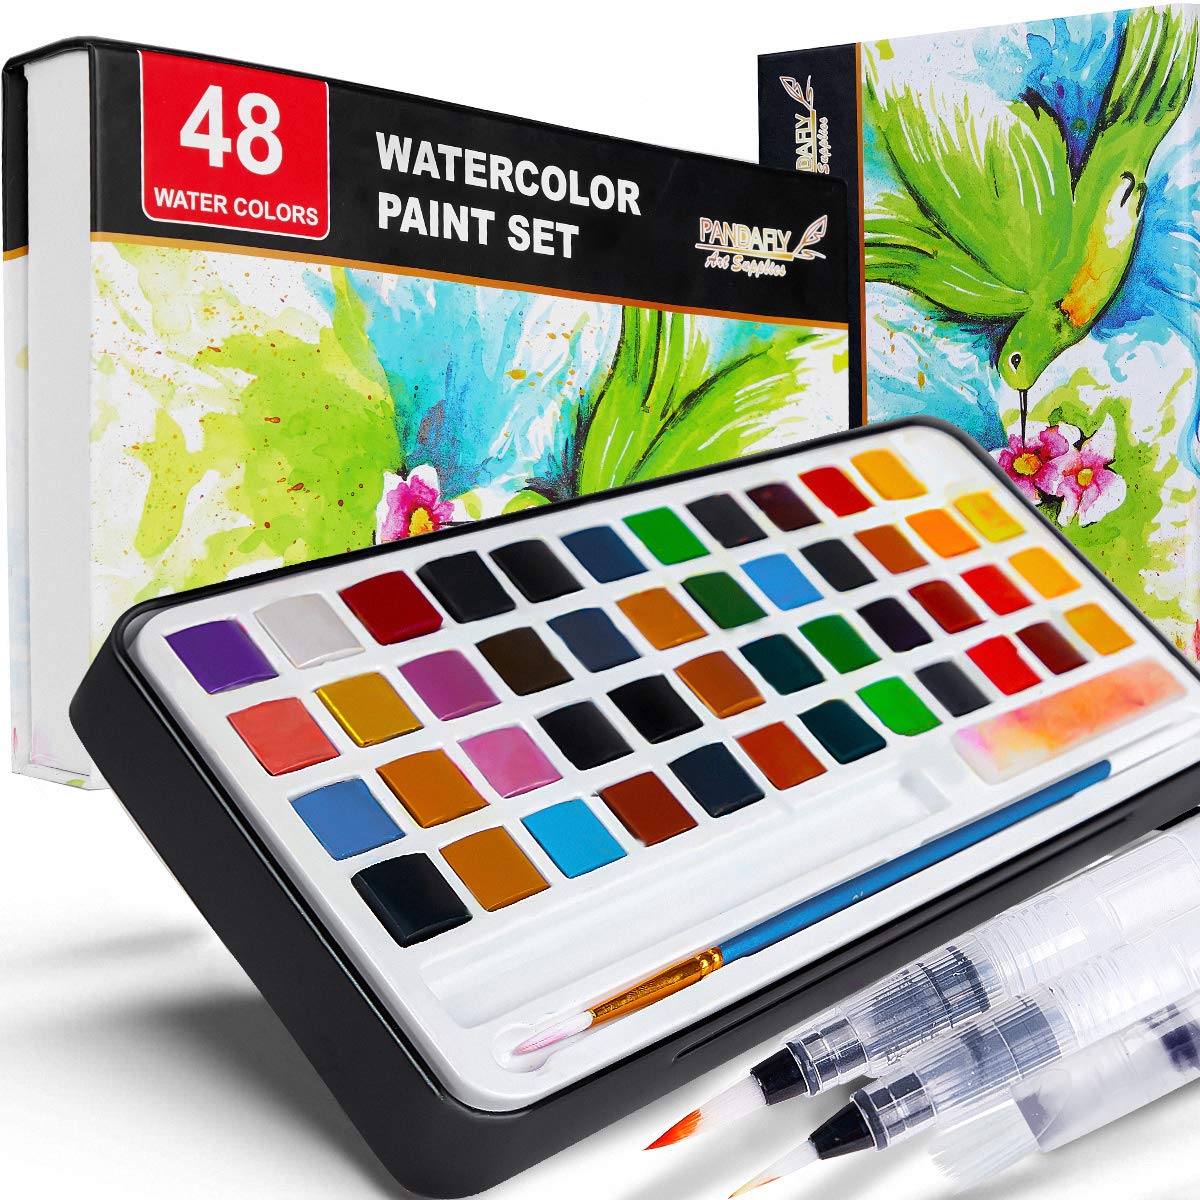 PANDAFLY Watercolor Paint Set, 48 Vivid Colors in Portable Box, Perfect Travel Watercolor Set for Kids, Artists, Beginners, Amateur Hobbyists and Painting Lovers